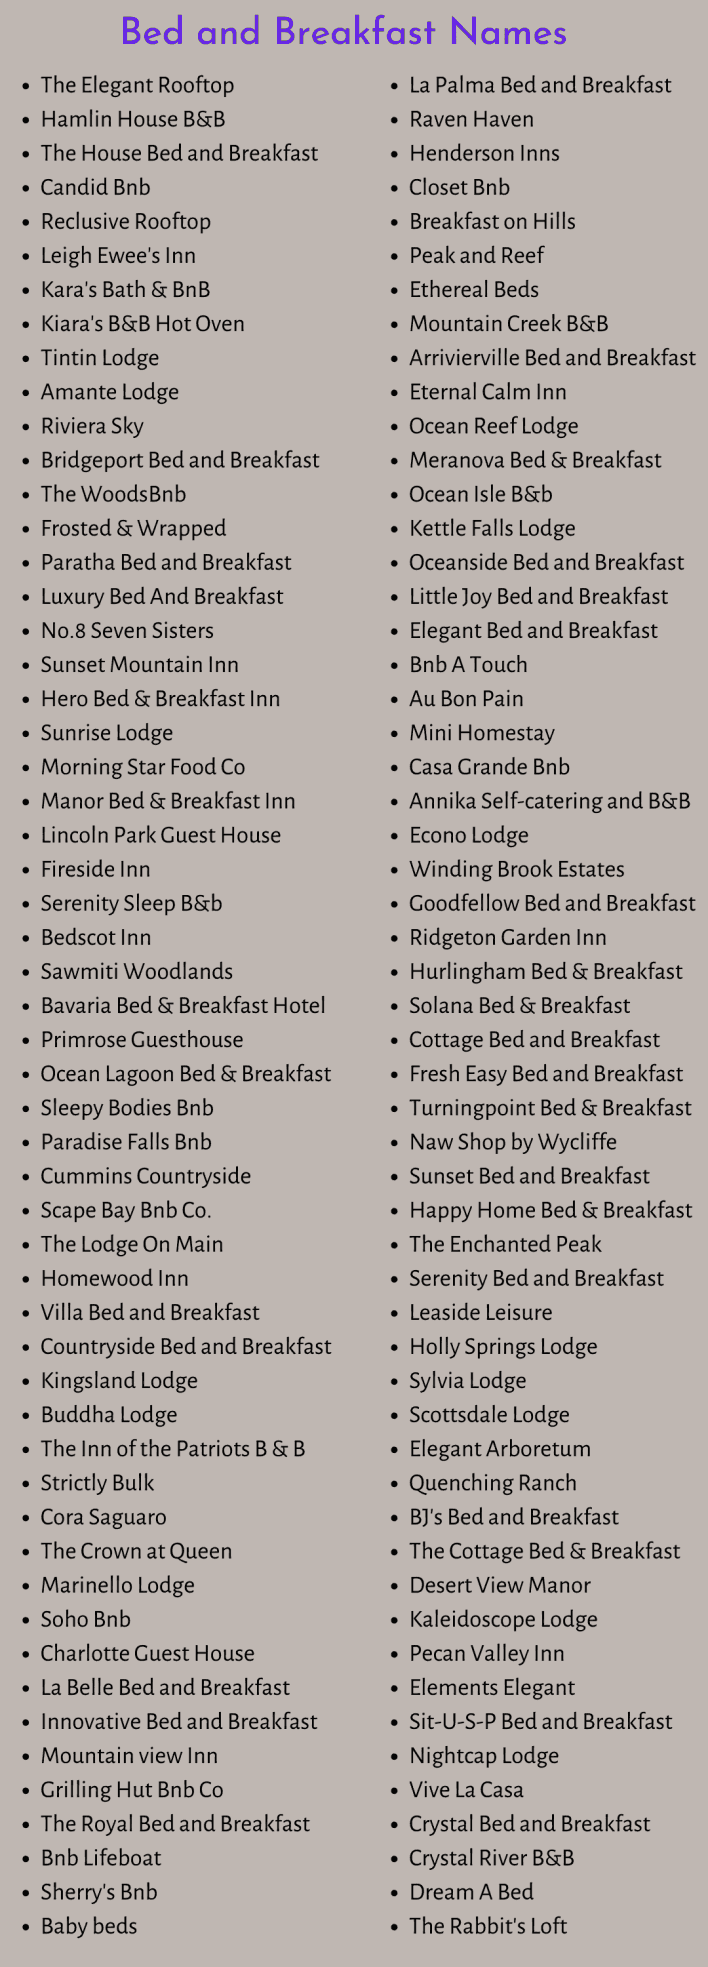 Bed and Breakfast Names